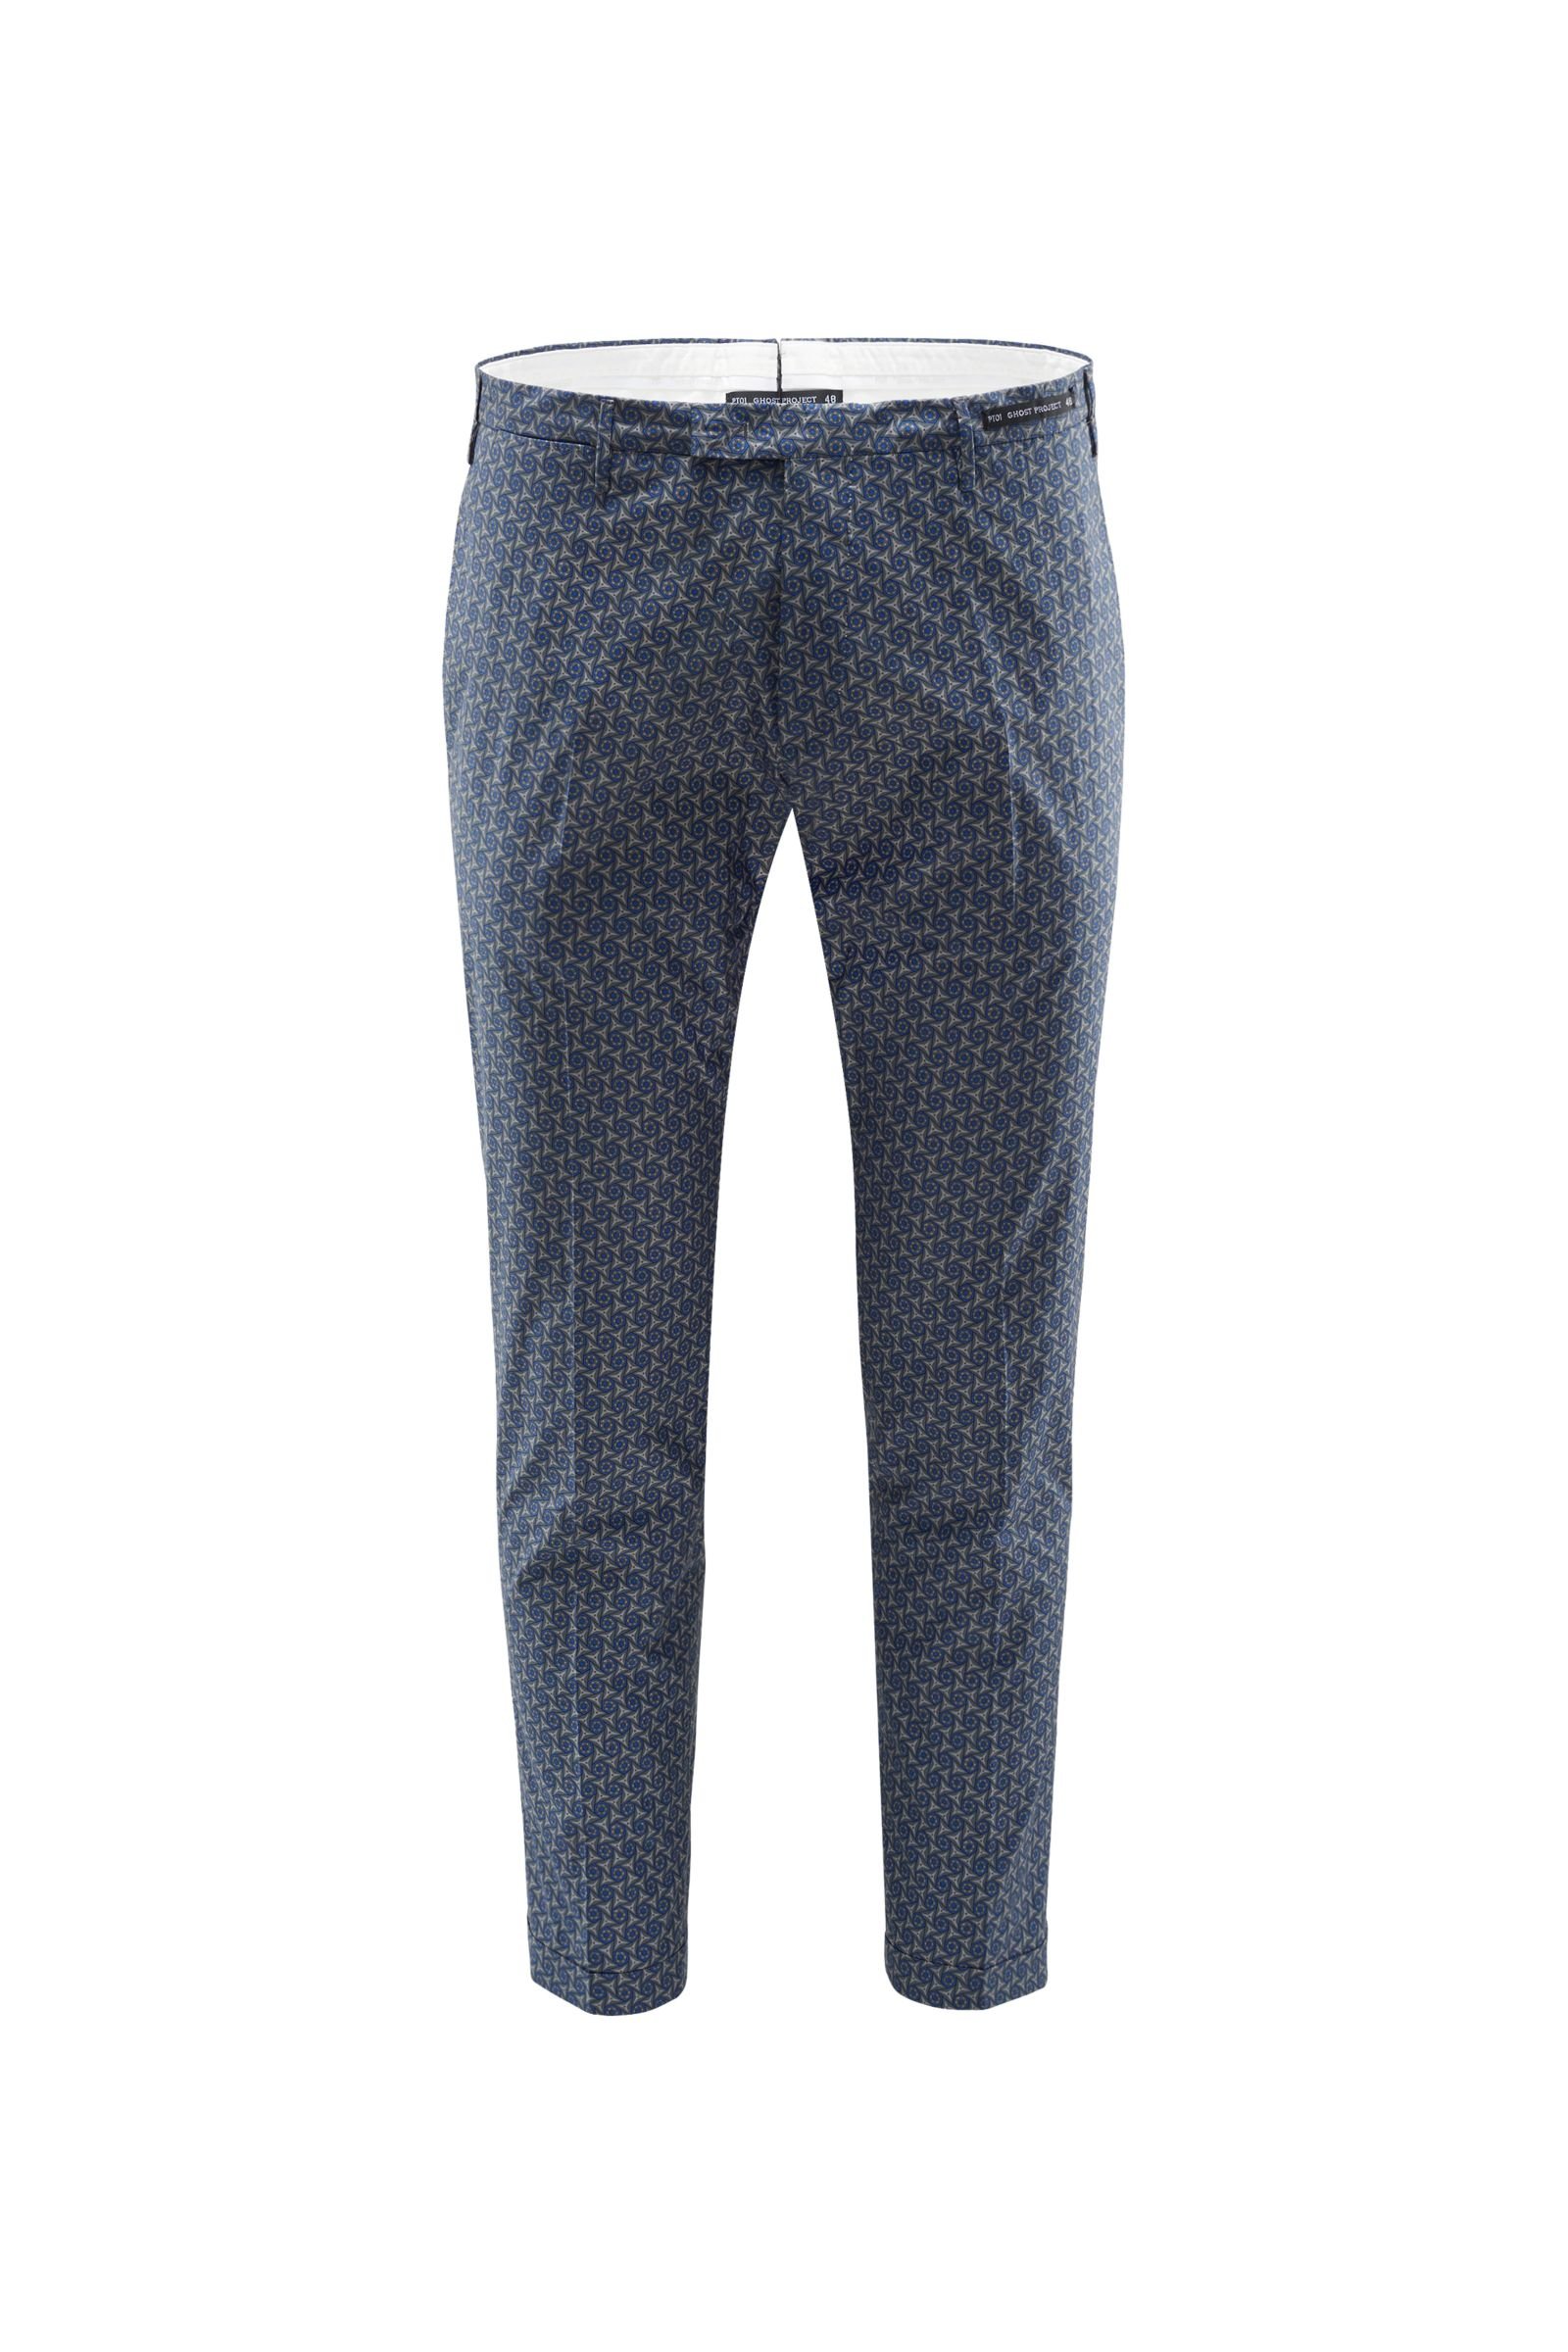 Cotton trousers 'Shade Regular Fit' blue patterned